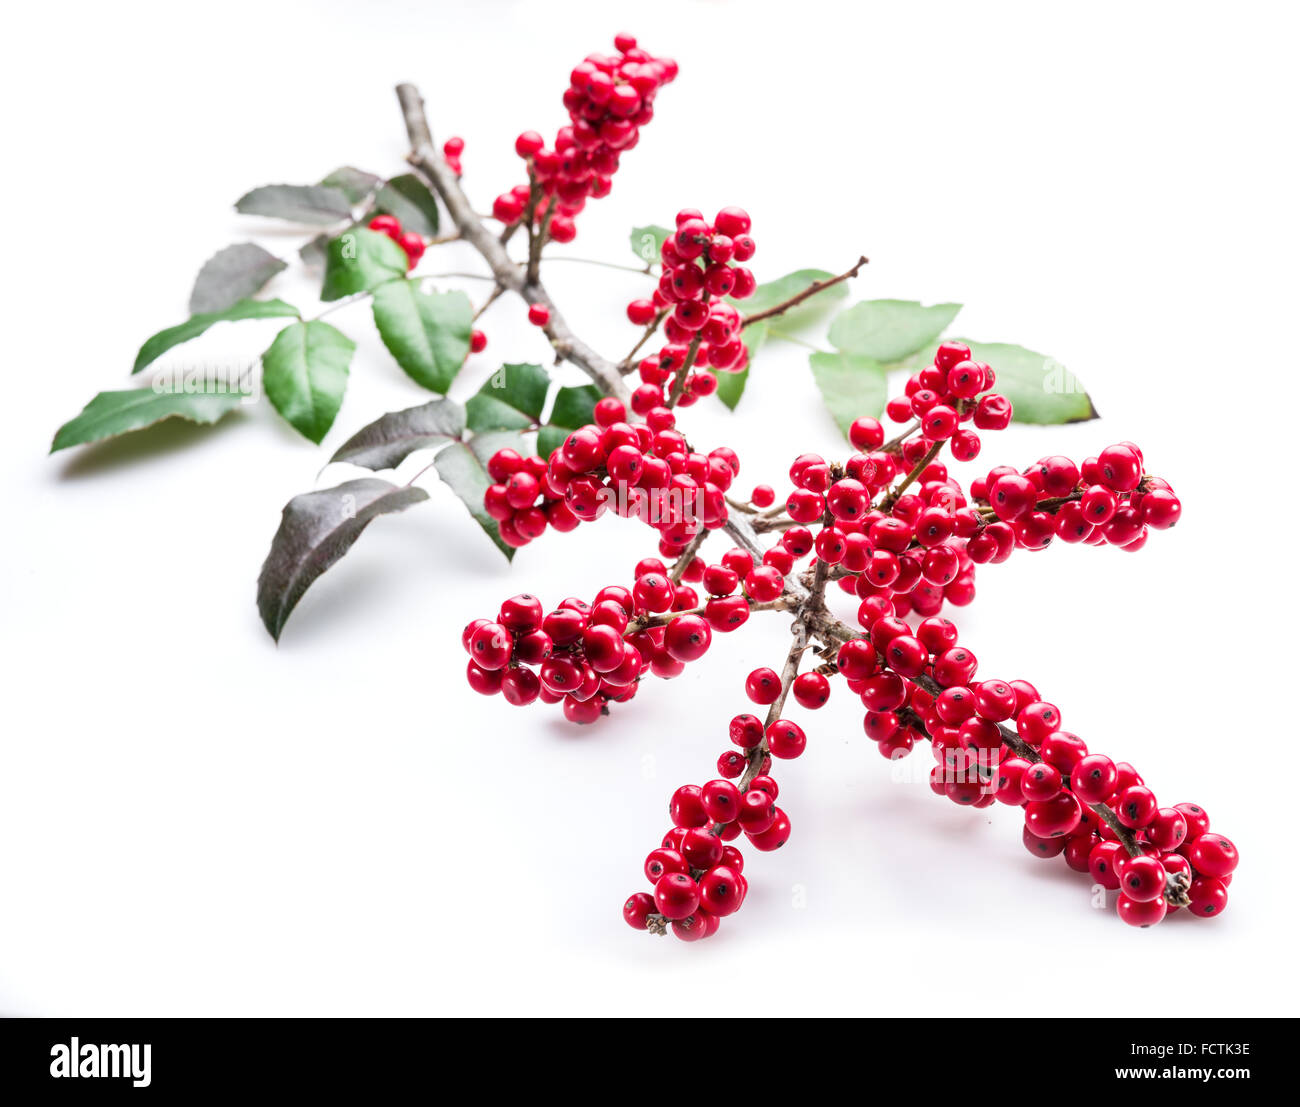 European Holly (Ilex) leaves and fruit on a white background. Stock Photo